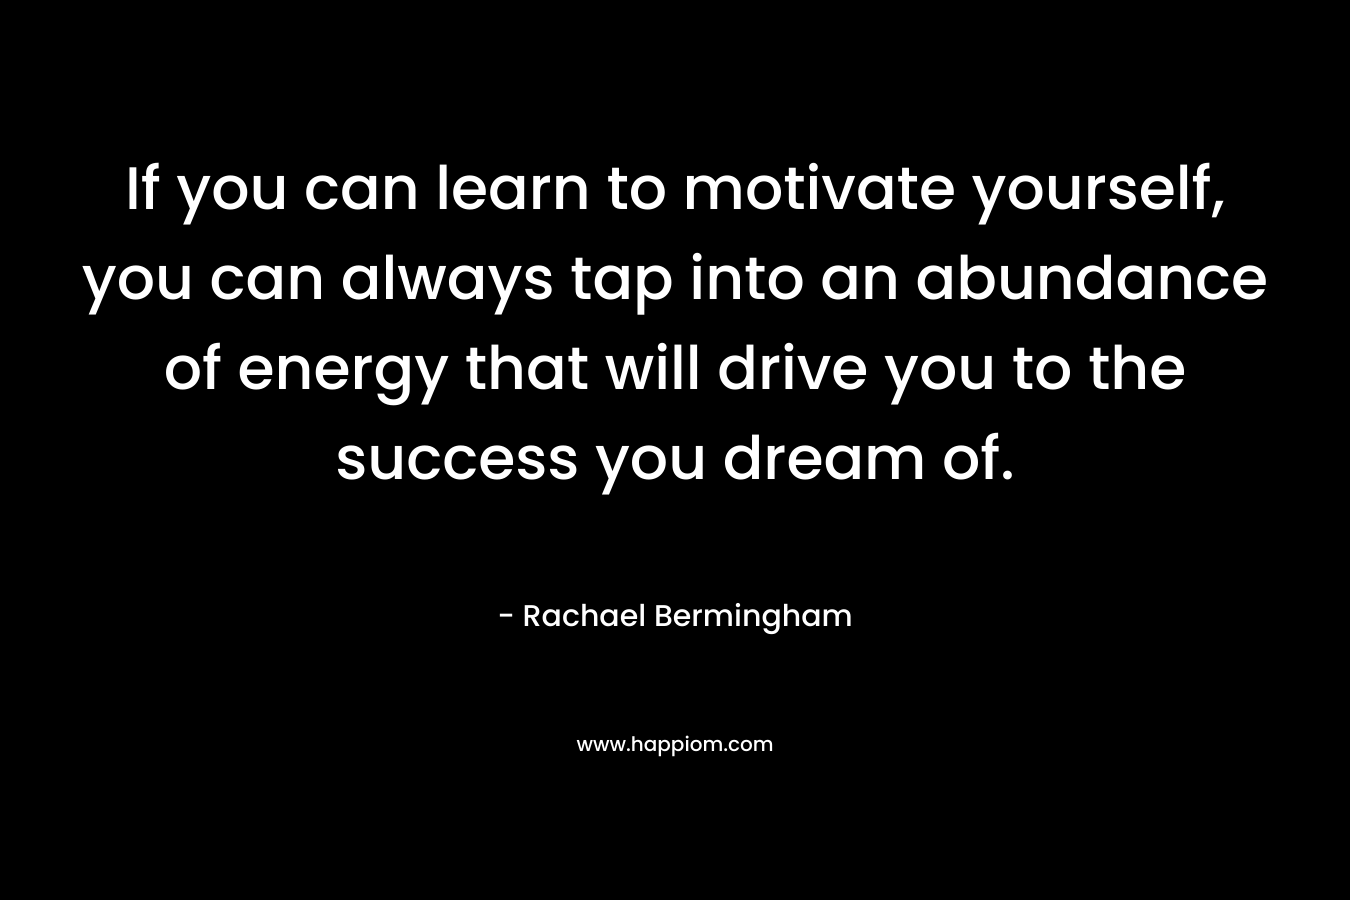 If you can learn to motivate yourself, you can always tap into an abundance of energy that will drive you to the success you dream of. – Rachael Bermingham